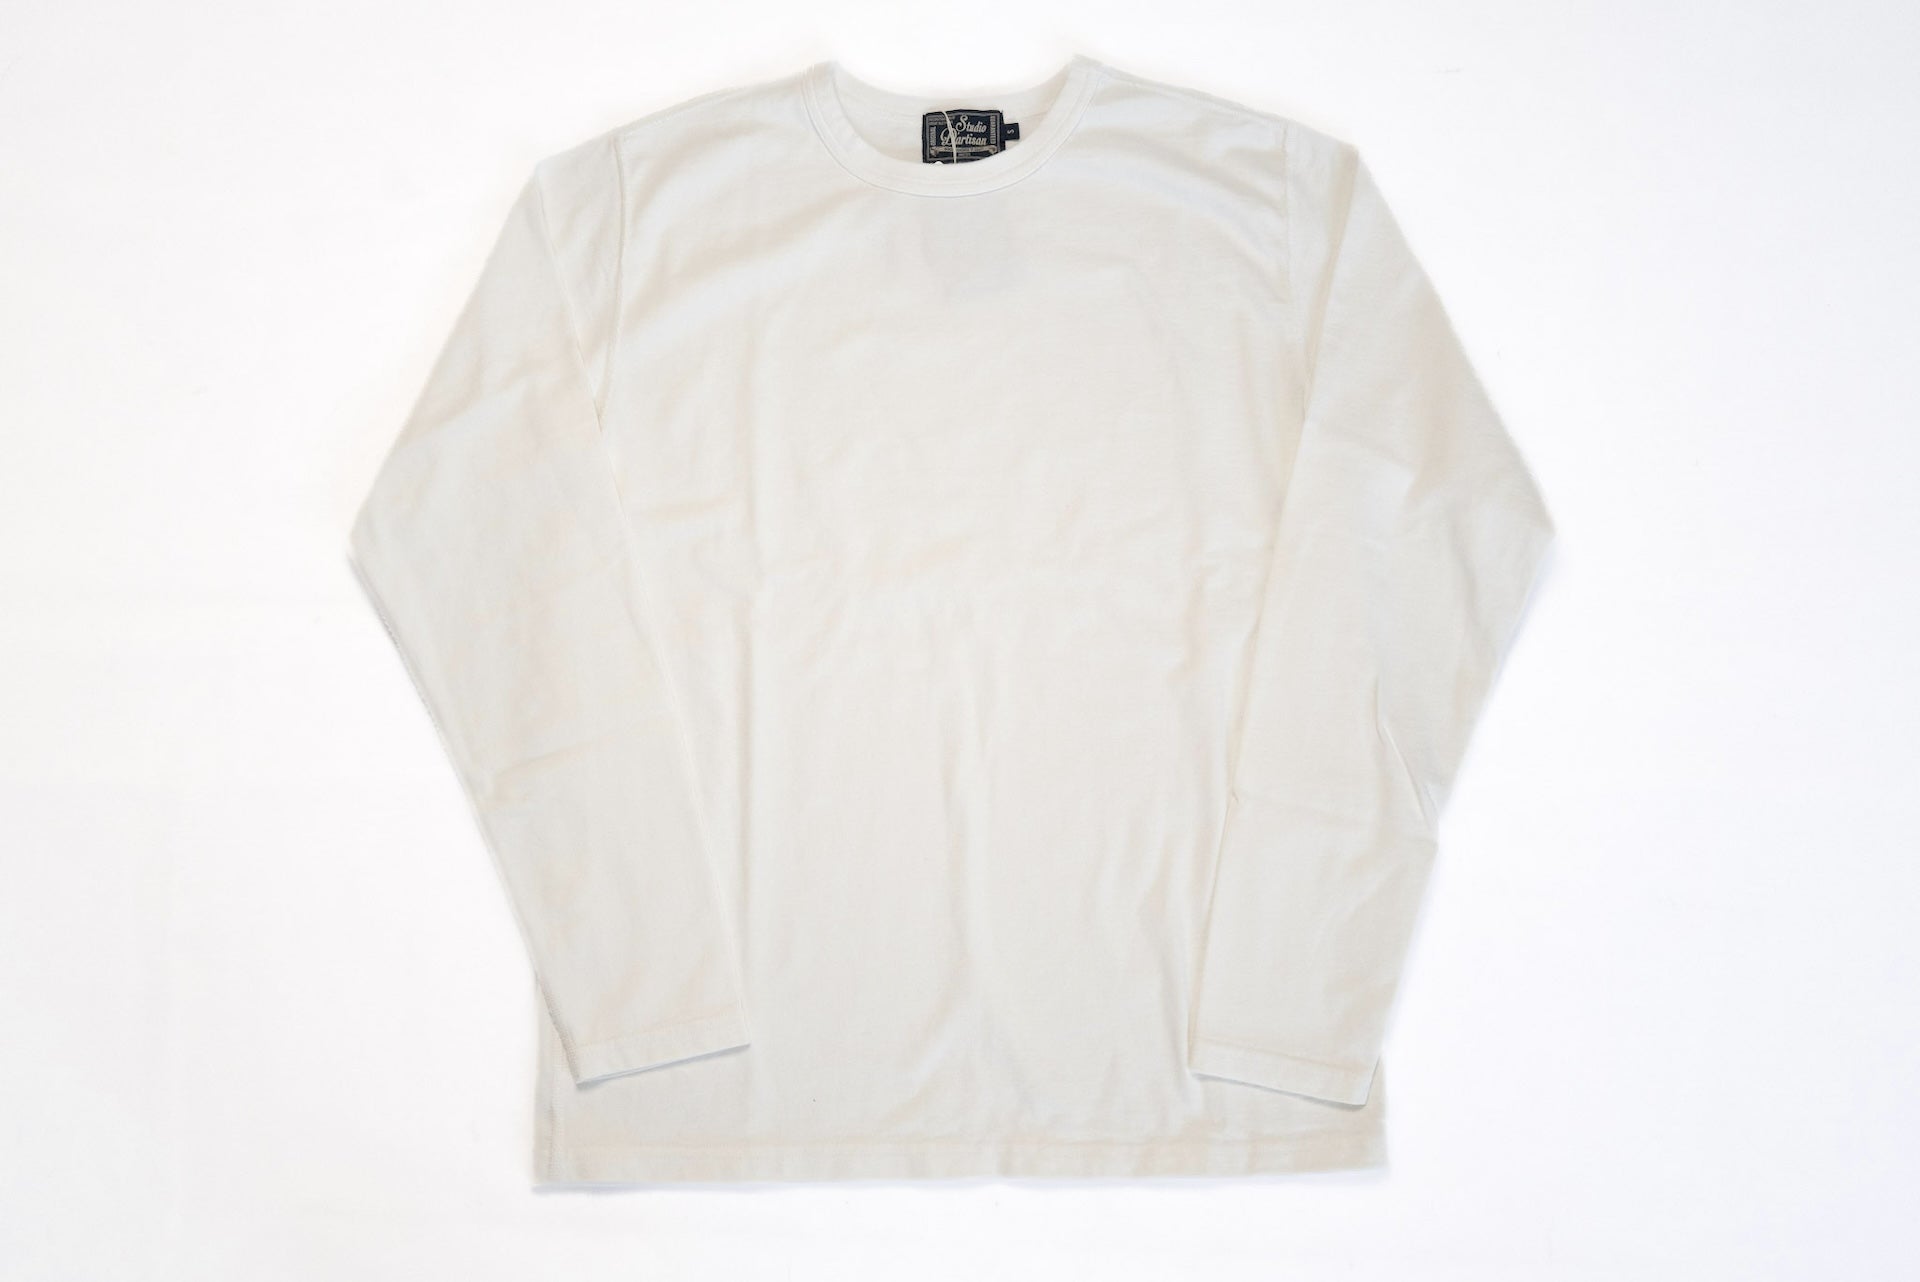 Studio D'Artisan X CORLECTION 7.5oz 'Suvin Gold' Ultimate Loopwheeled L/S Tee (White)